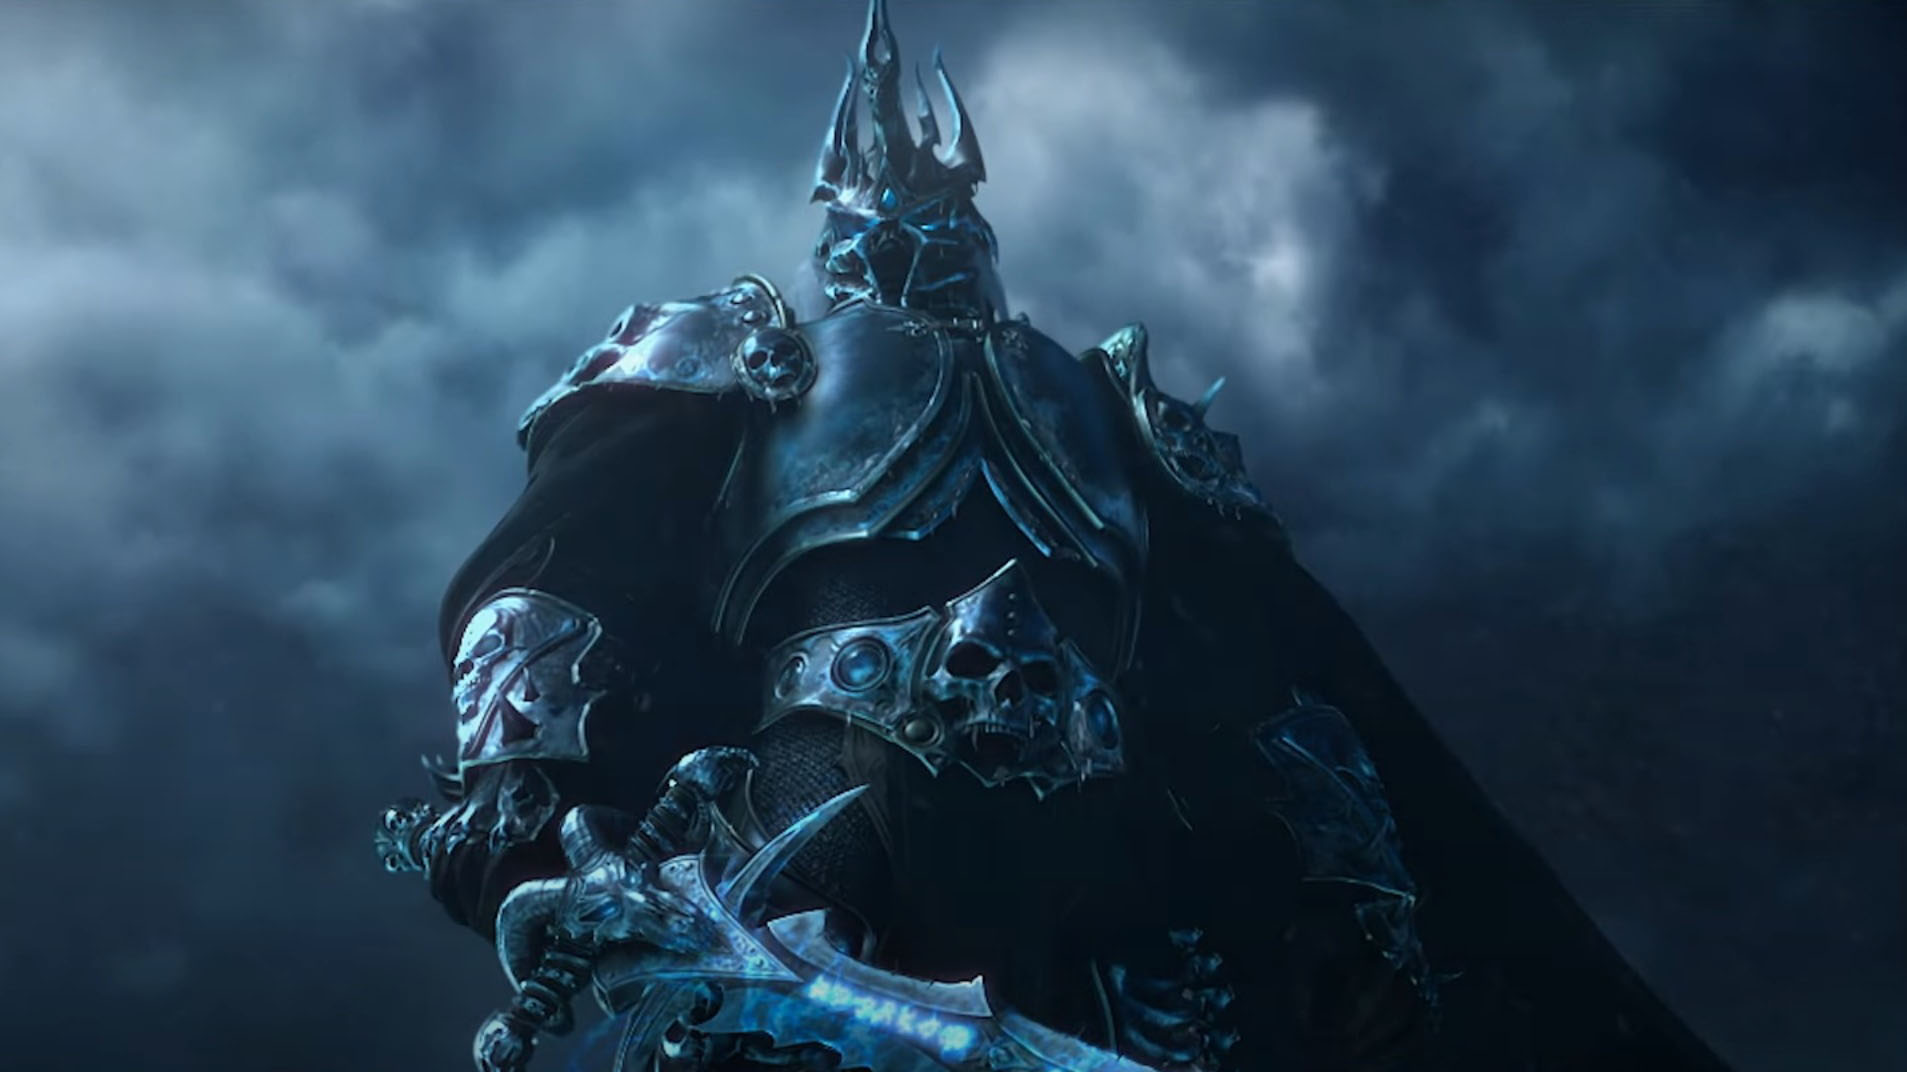 World of Warcraft Wrath of the Lich King Classic expansion announced